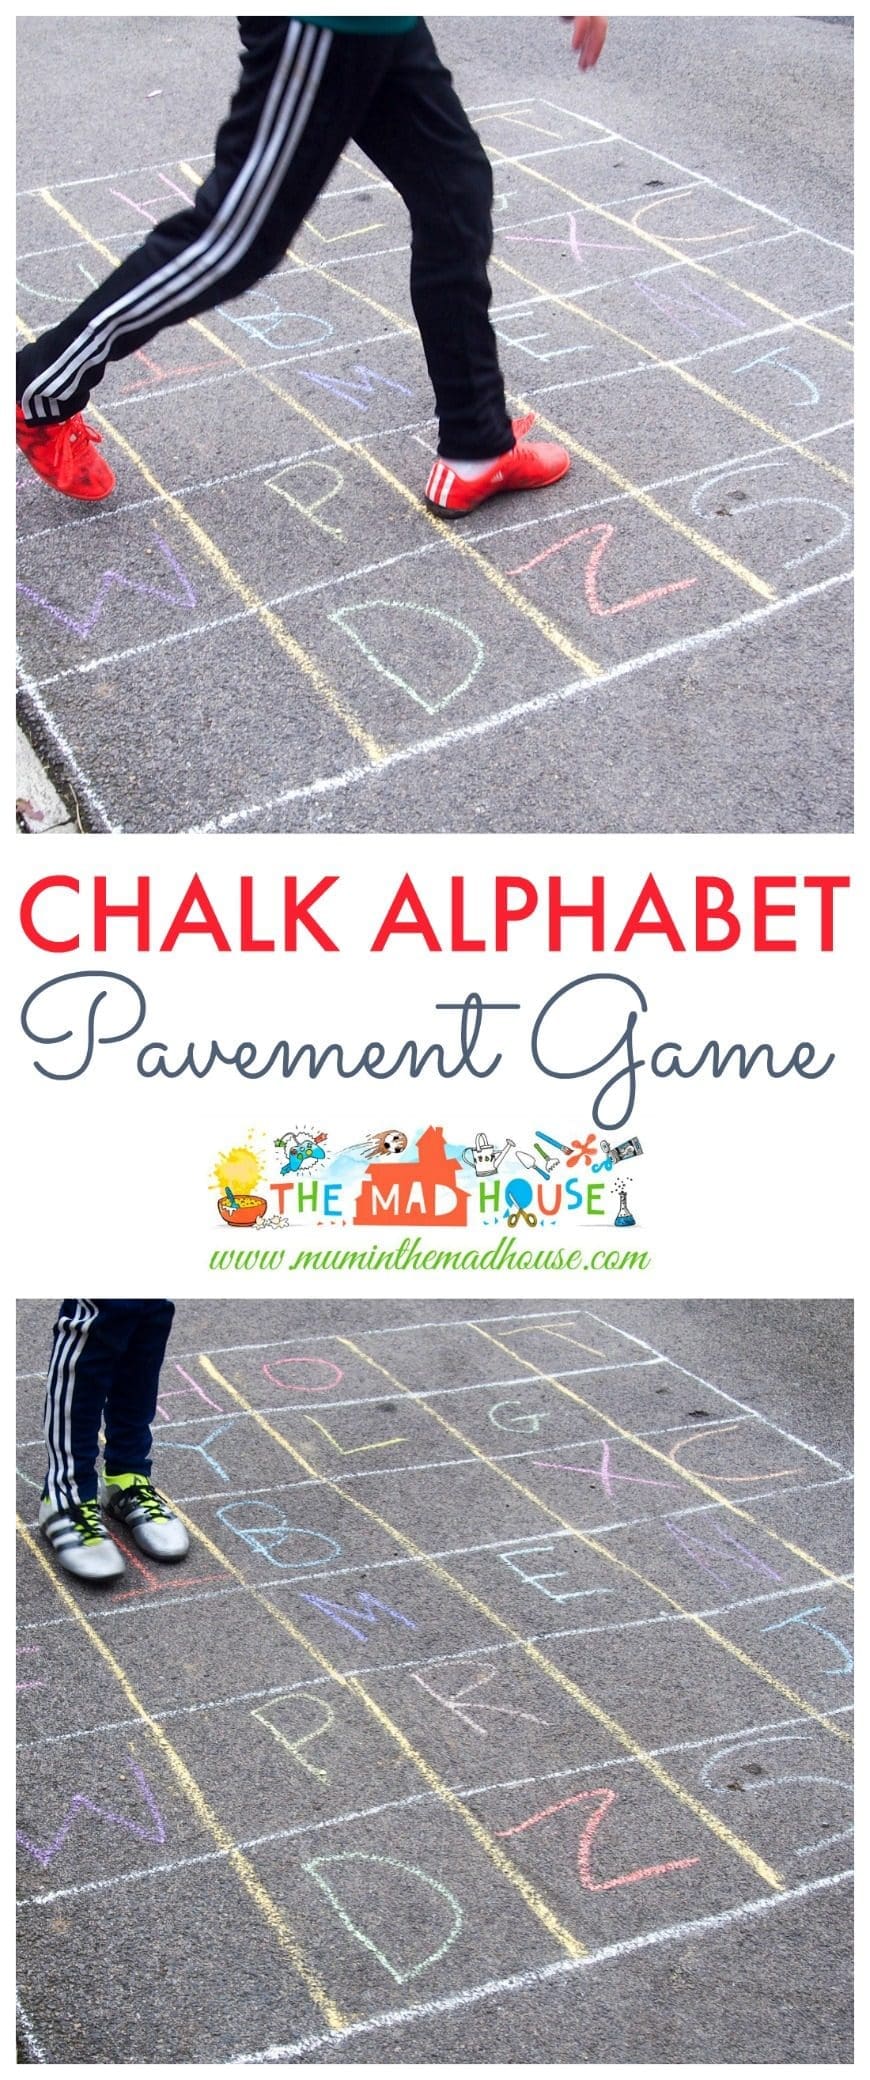 Chalk Alphabet pavement game. This outdoor game is perfect for helping children learn ABC's, spelling, and much more. We use it to make movie nights more memorable as a family fun activities. You can also play word twister, which is a hilarious family game. 